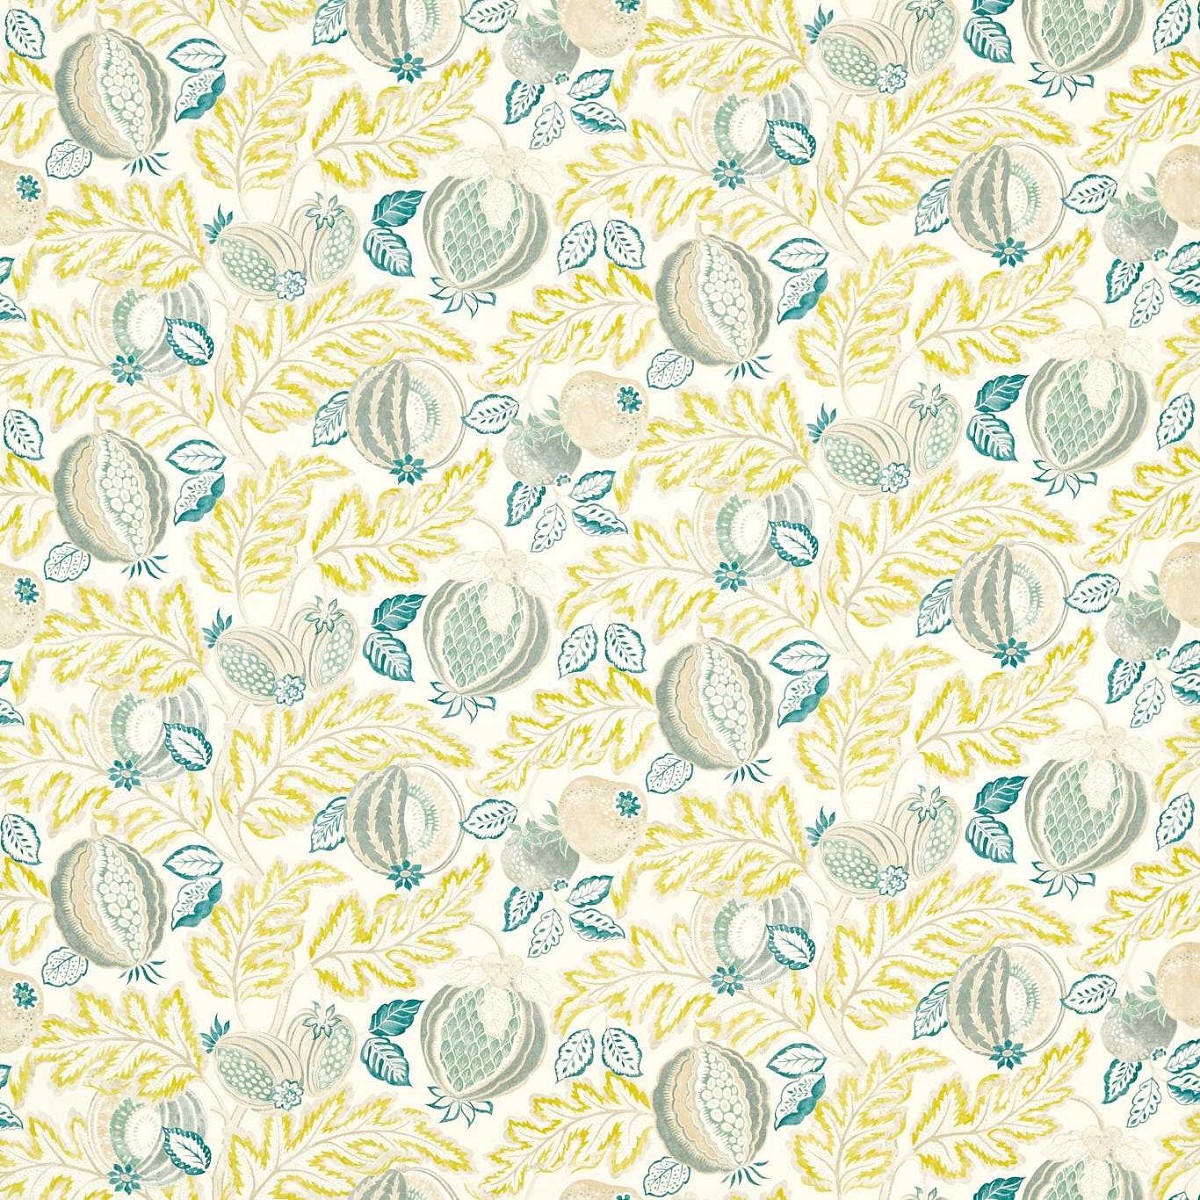 Cantaloupe Seasalt/Quince Fabric by Sanderson